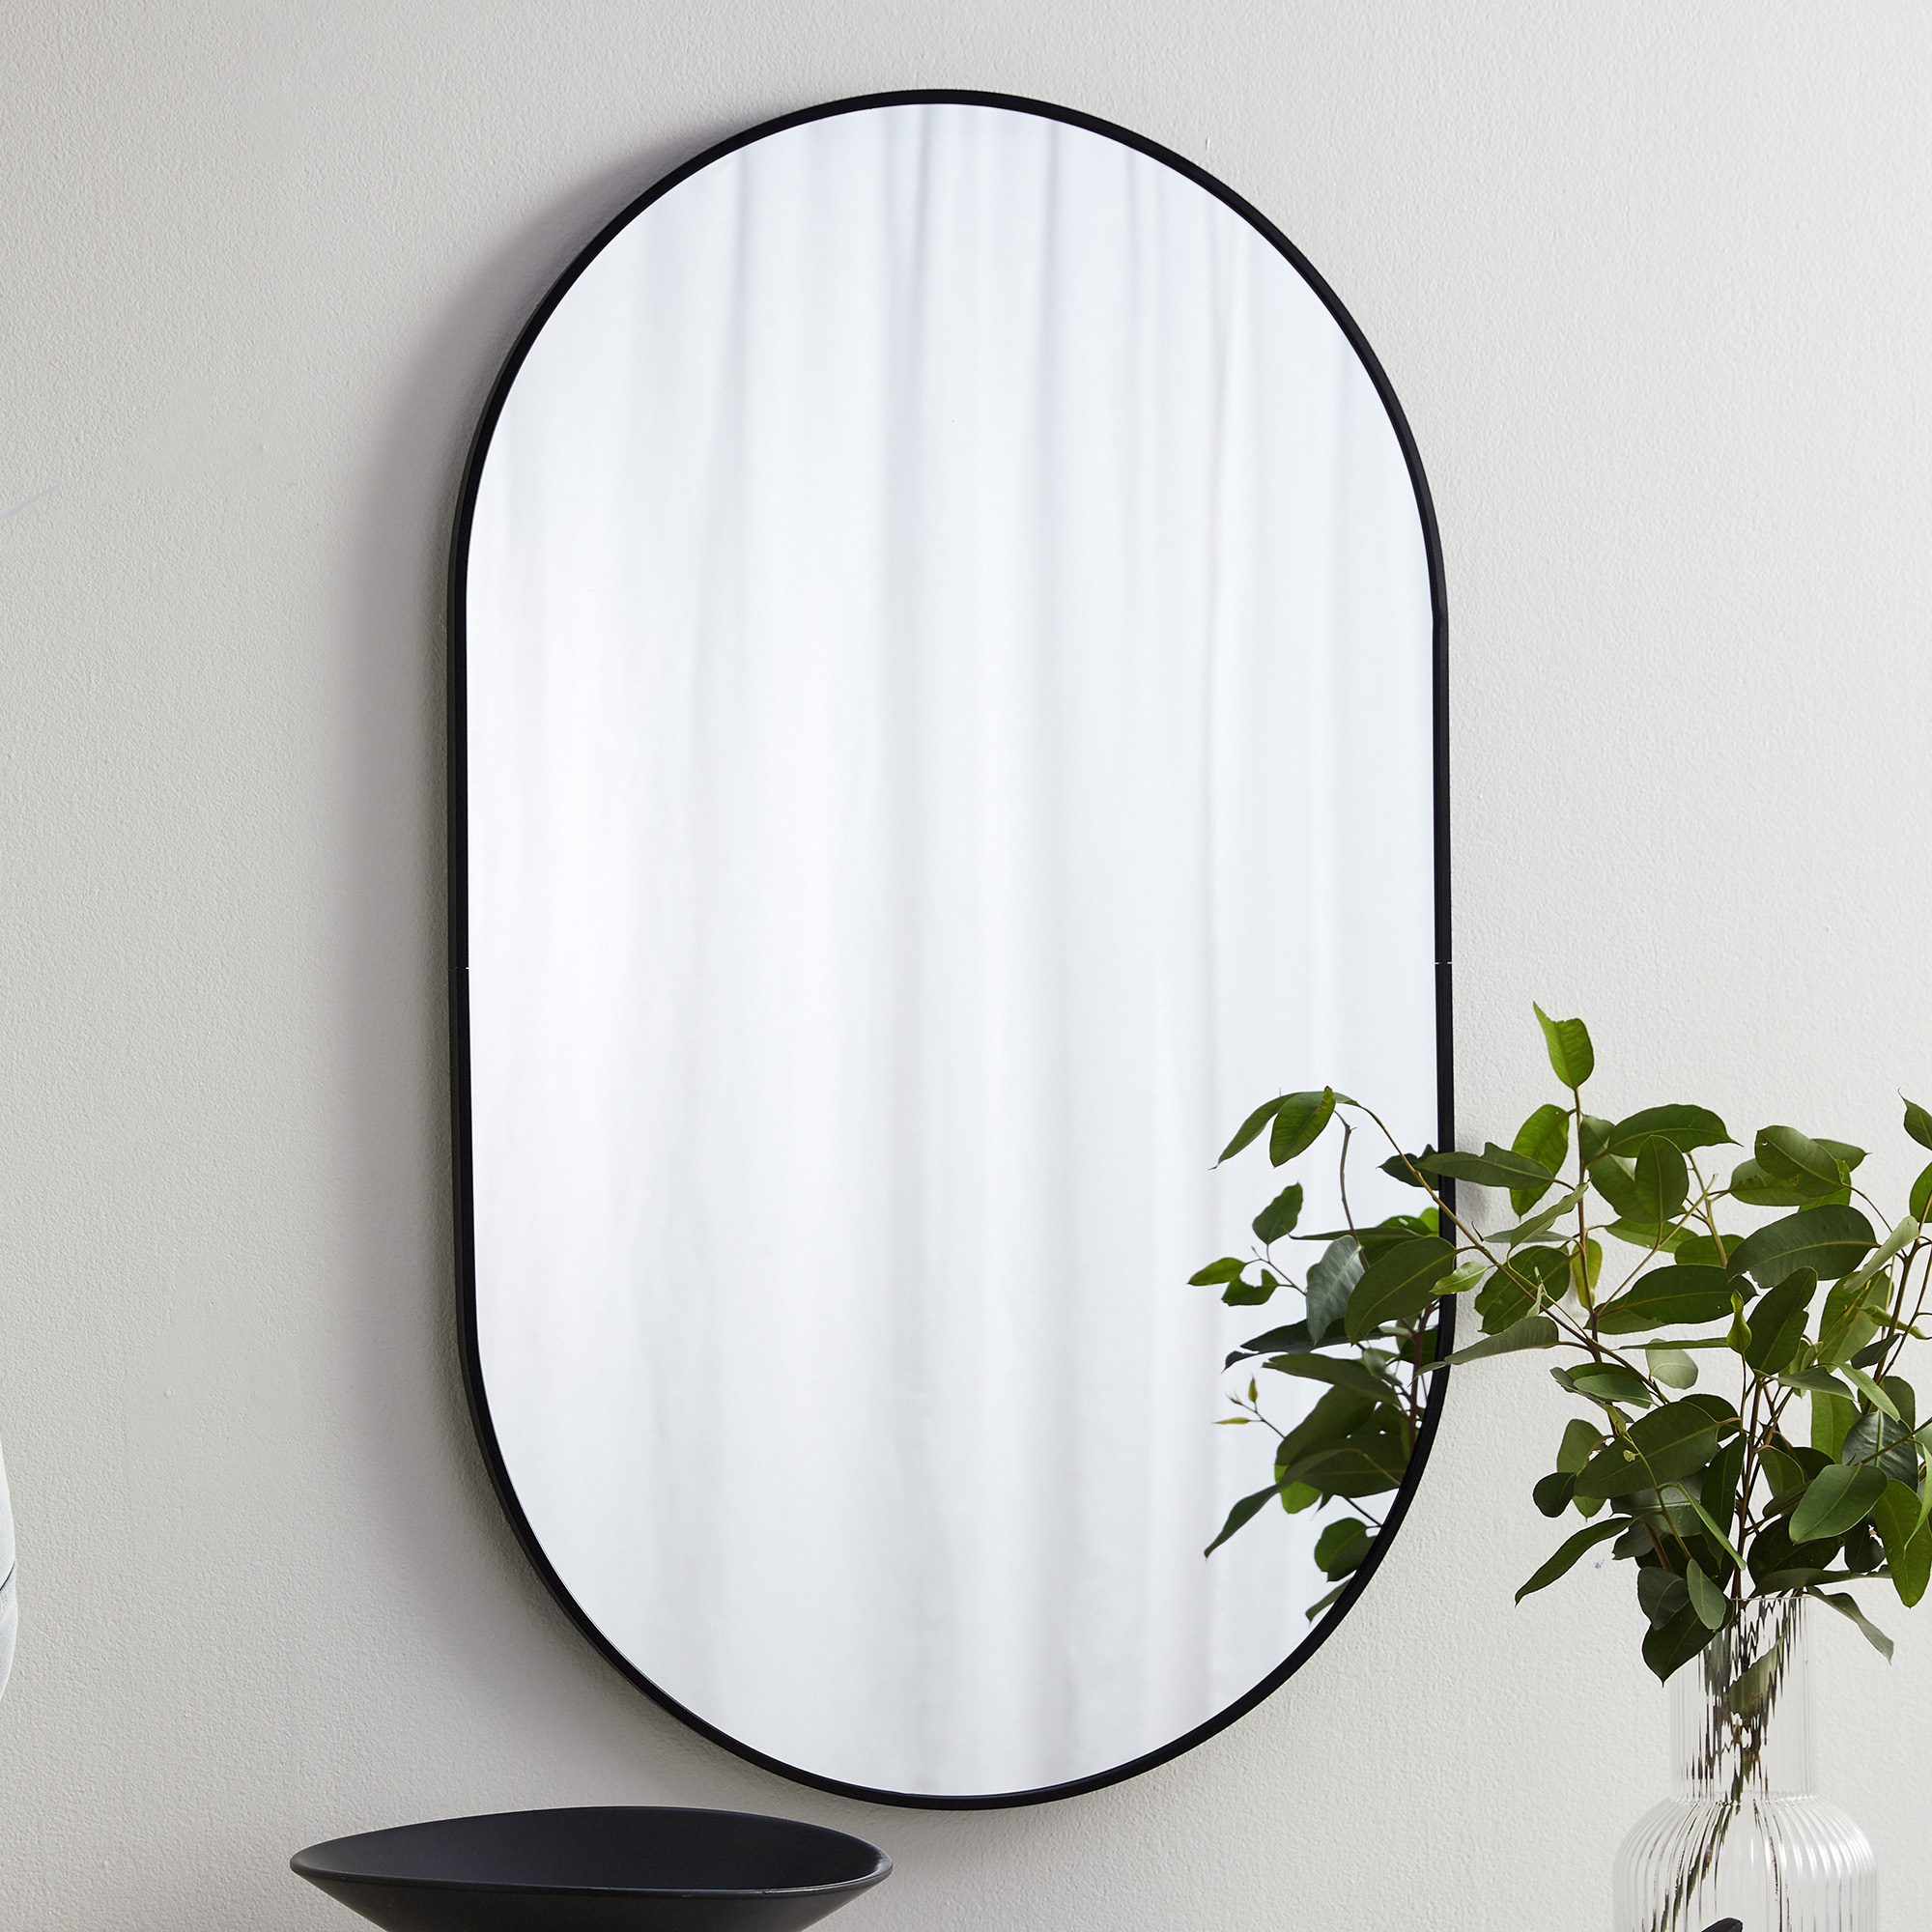 Webster Tate Oval Metal Framed Wall Mirror, Metal Framed Oval Mirrors